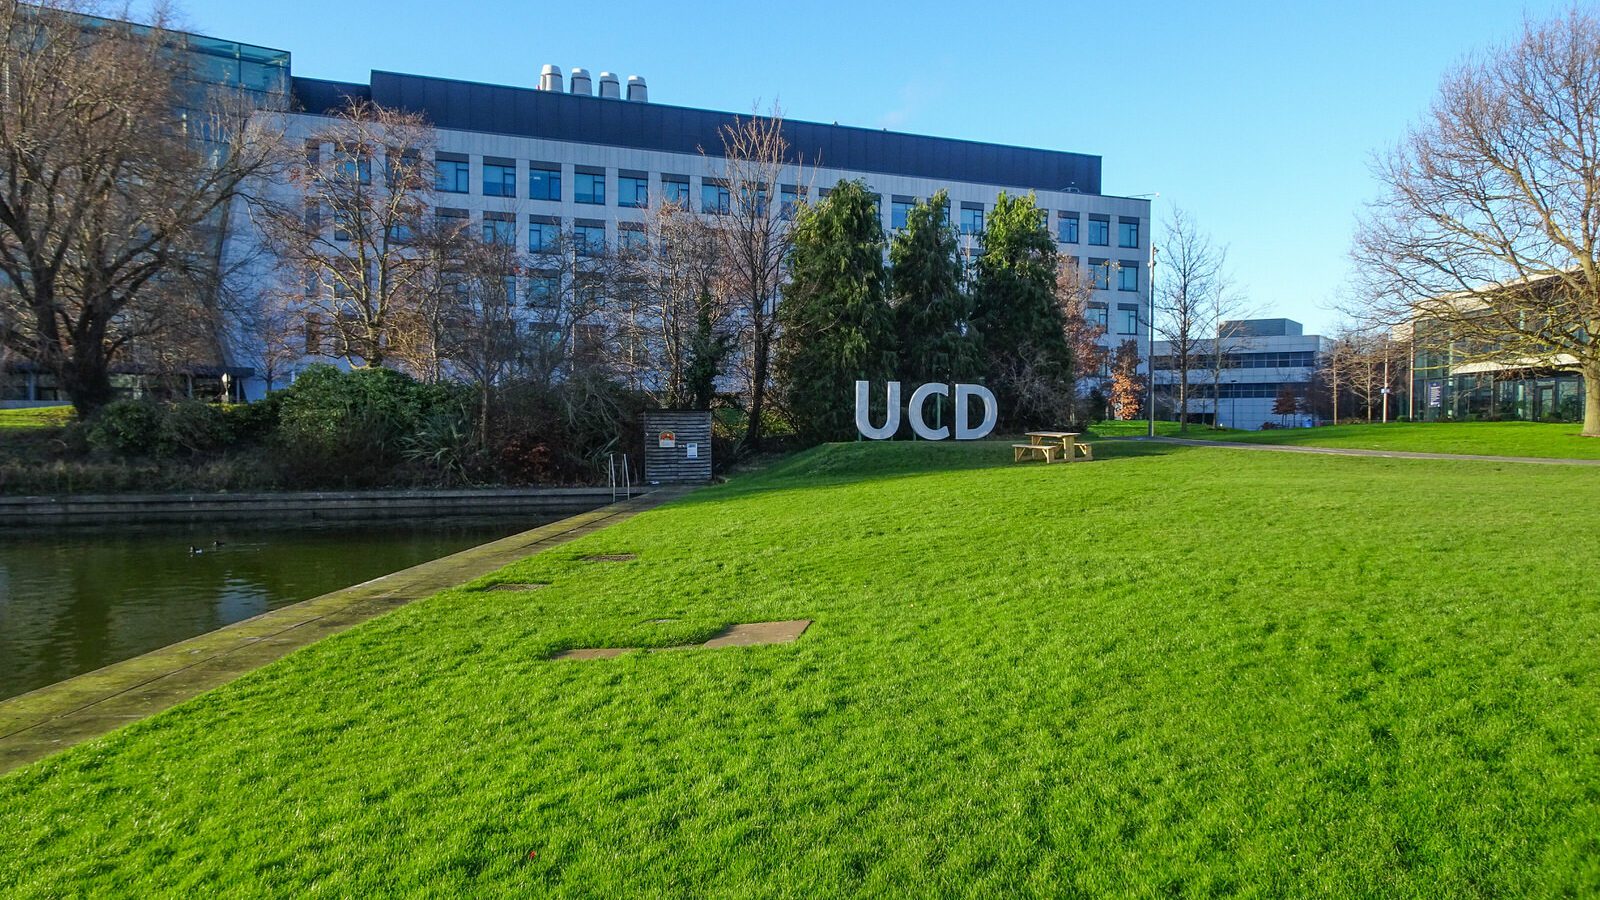 RANDOM IMAGES OF THE UNIVERSITY OF DUBLIN CAMPUS [MY MOTHER WHO IS 104 IN MAY DID NOT WANT TO COME WITH ME AS IT WAS TOO COLD]-226717-1